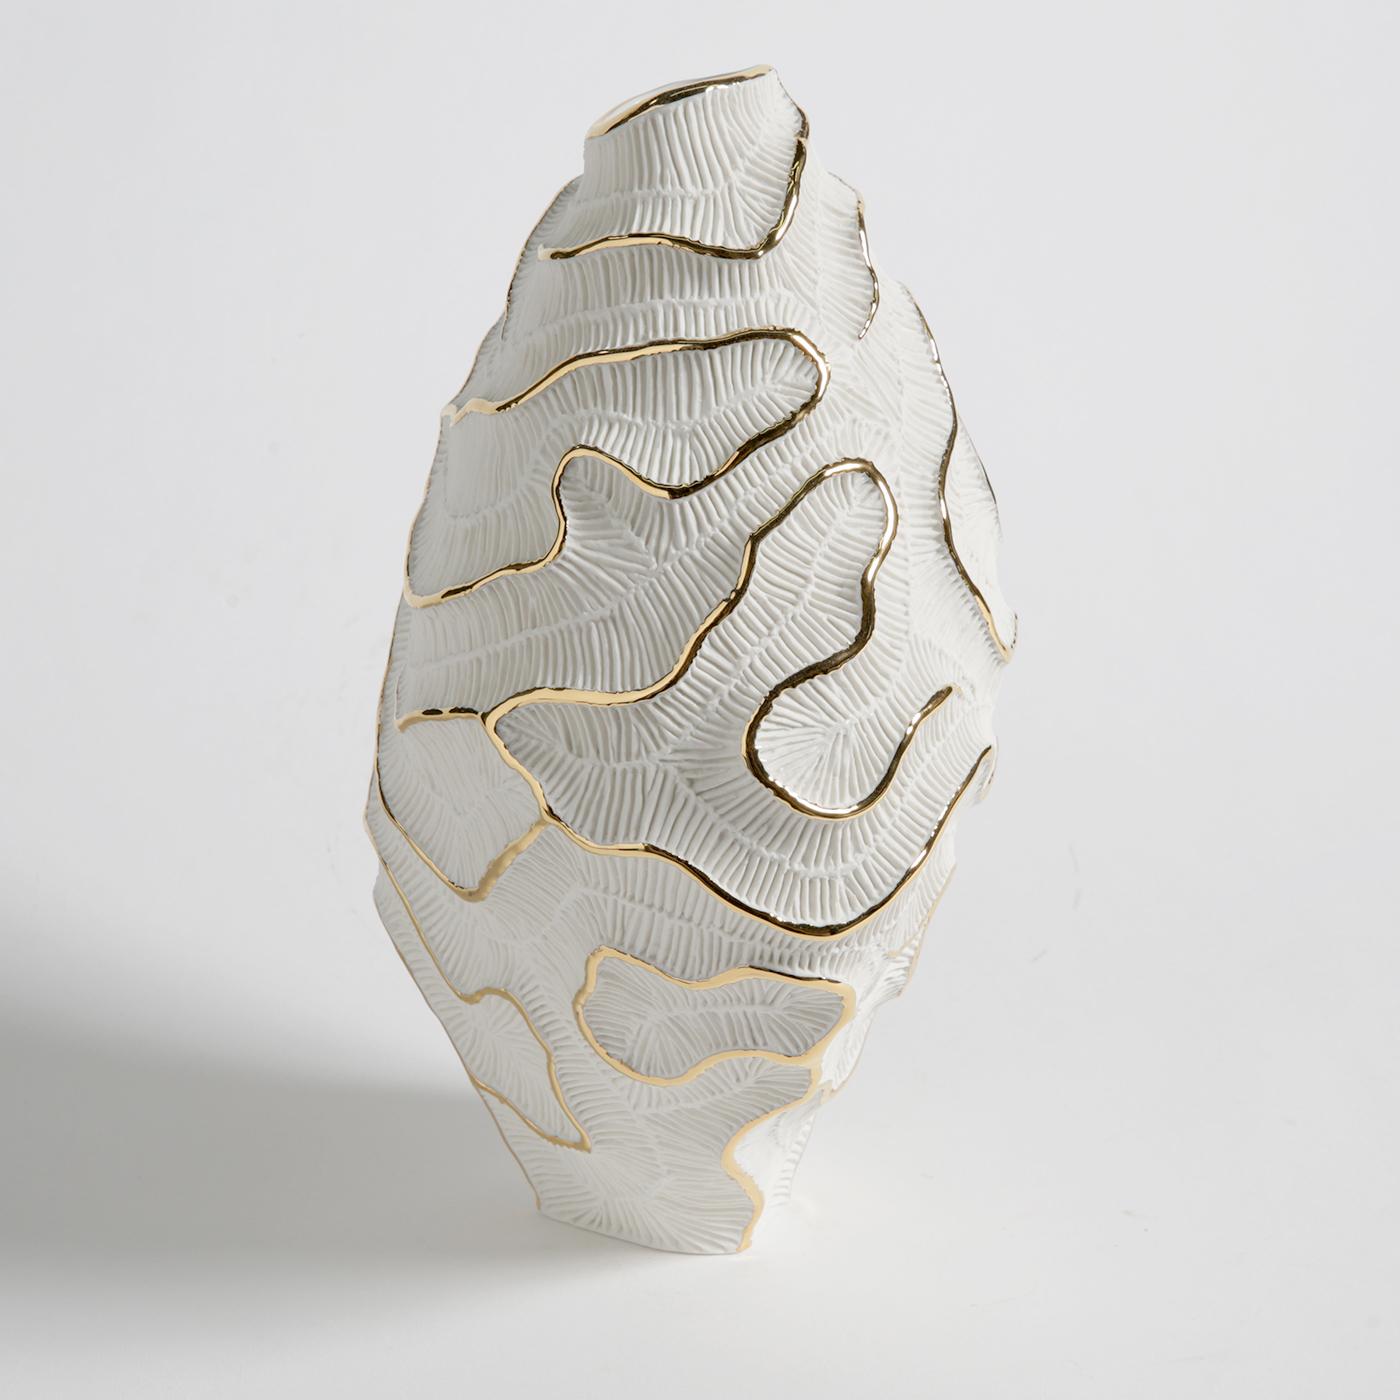 Fossils of madrepore inspire the minute texture decorating this striking vase of the Fossilia collection. A meticulously crafted mold and the use of unglazed porcelain, or 